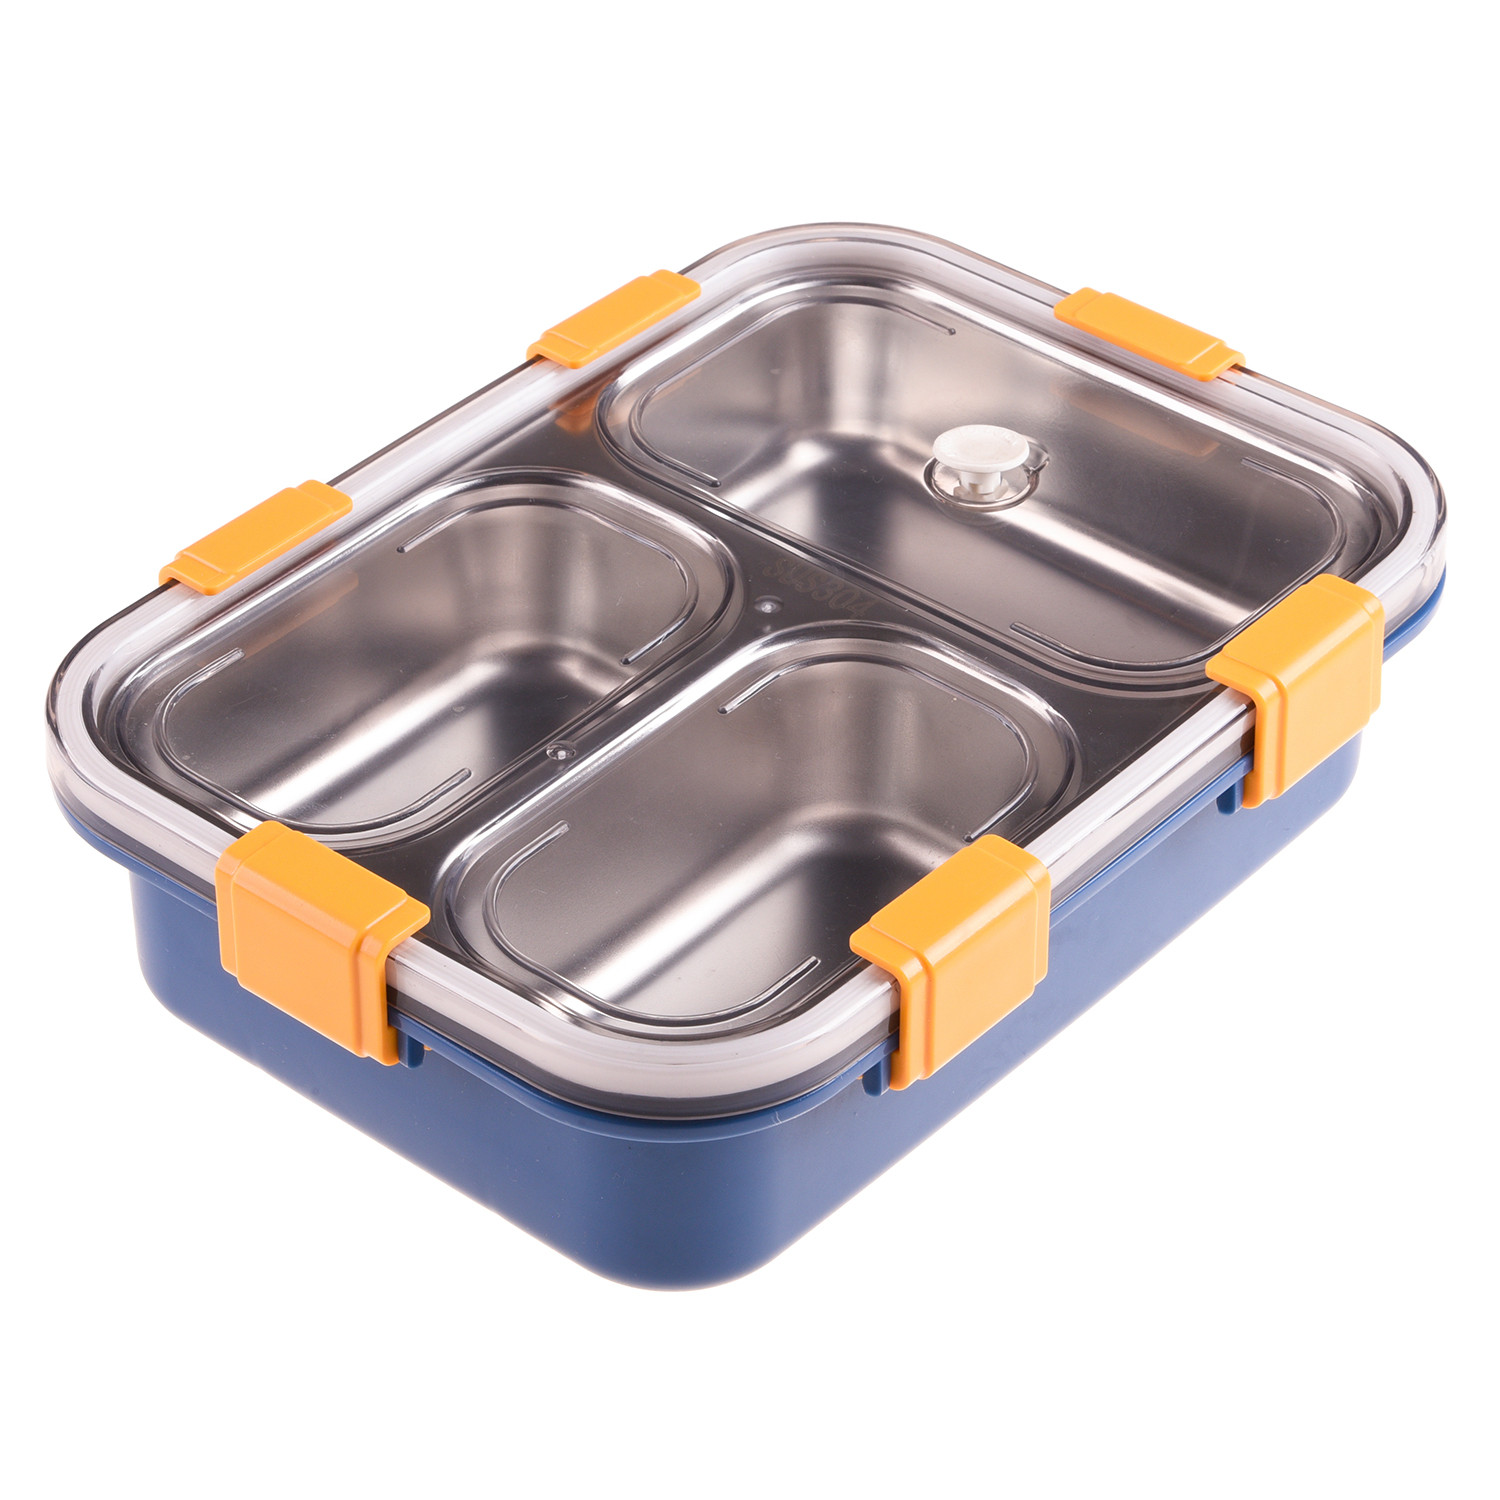 Kuber Industries Lunch Box | Stainless Steel 3 Compartments Lunch Box | Students Lunch Box | Office Lunch Box | Chopstick & Spoon | Leak-Proof Lunch Box | SUS304 | Blue